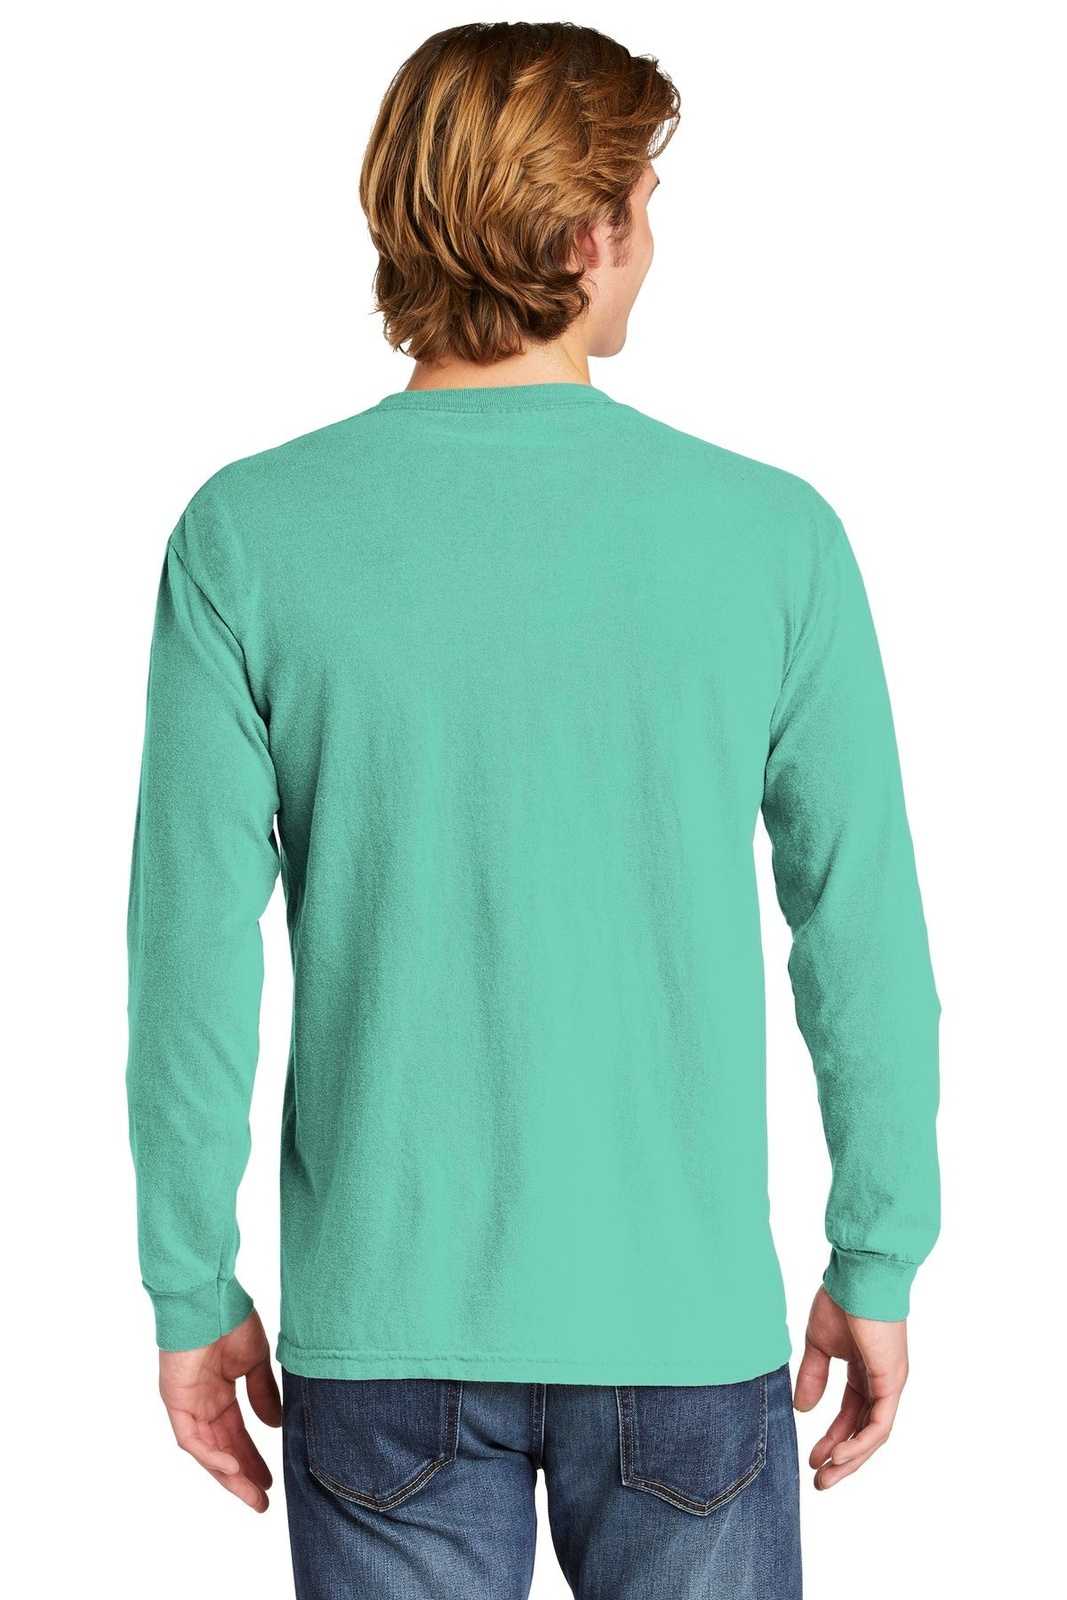 Comfort Colors 4410 Heavyweight Ring Spun Long Sleeve Pocket Tee - Chalky Mint - HIT a Double